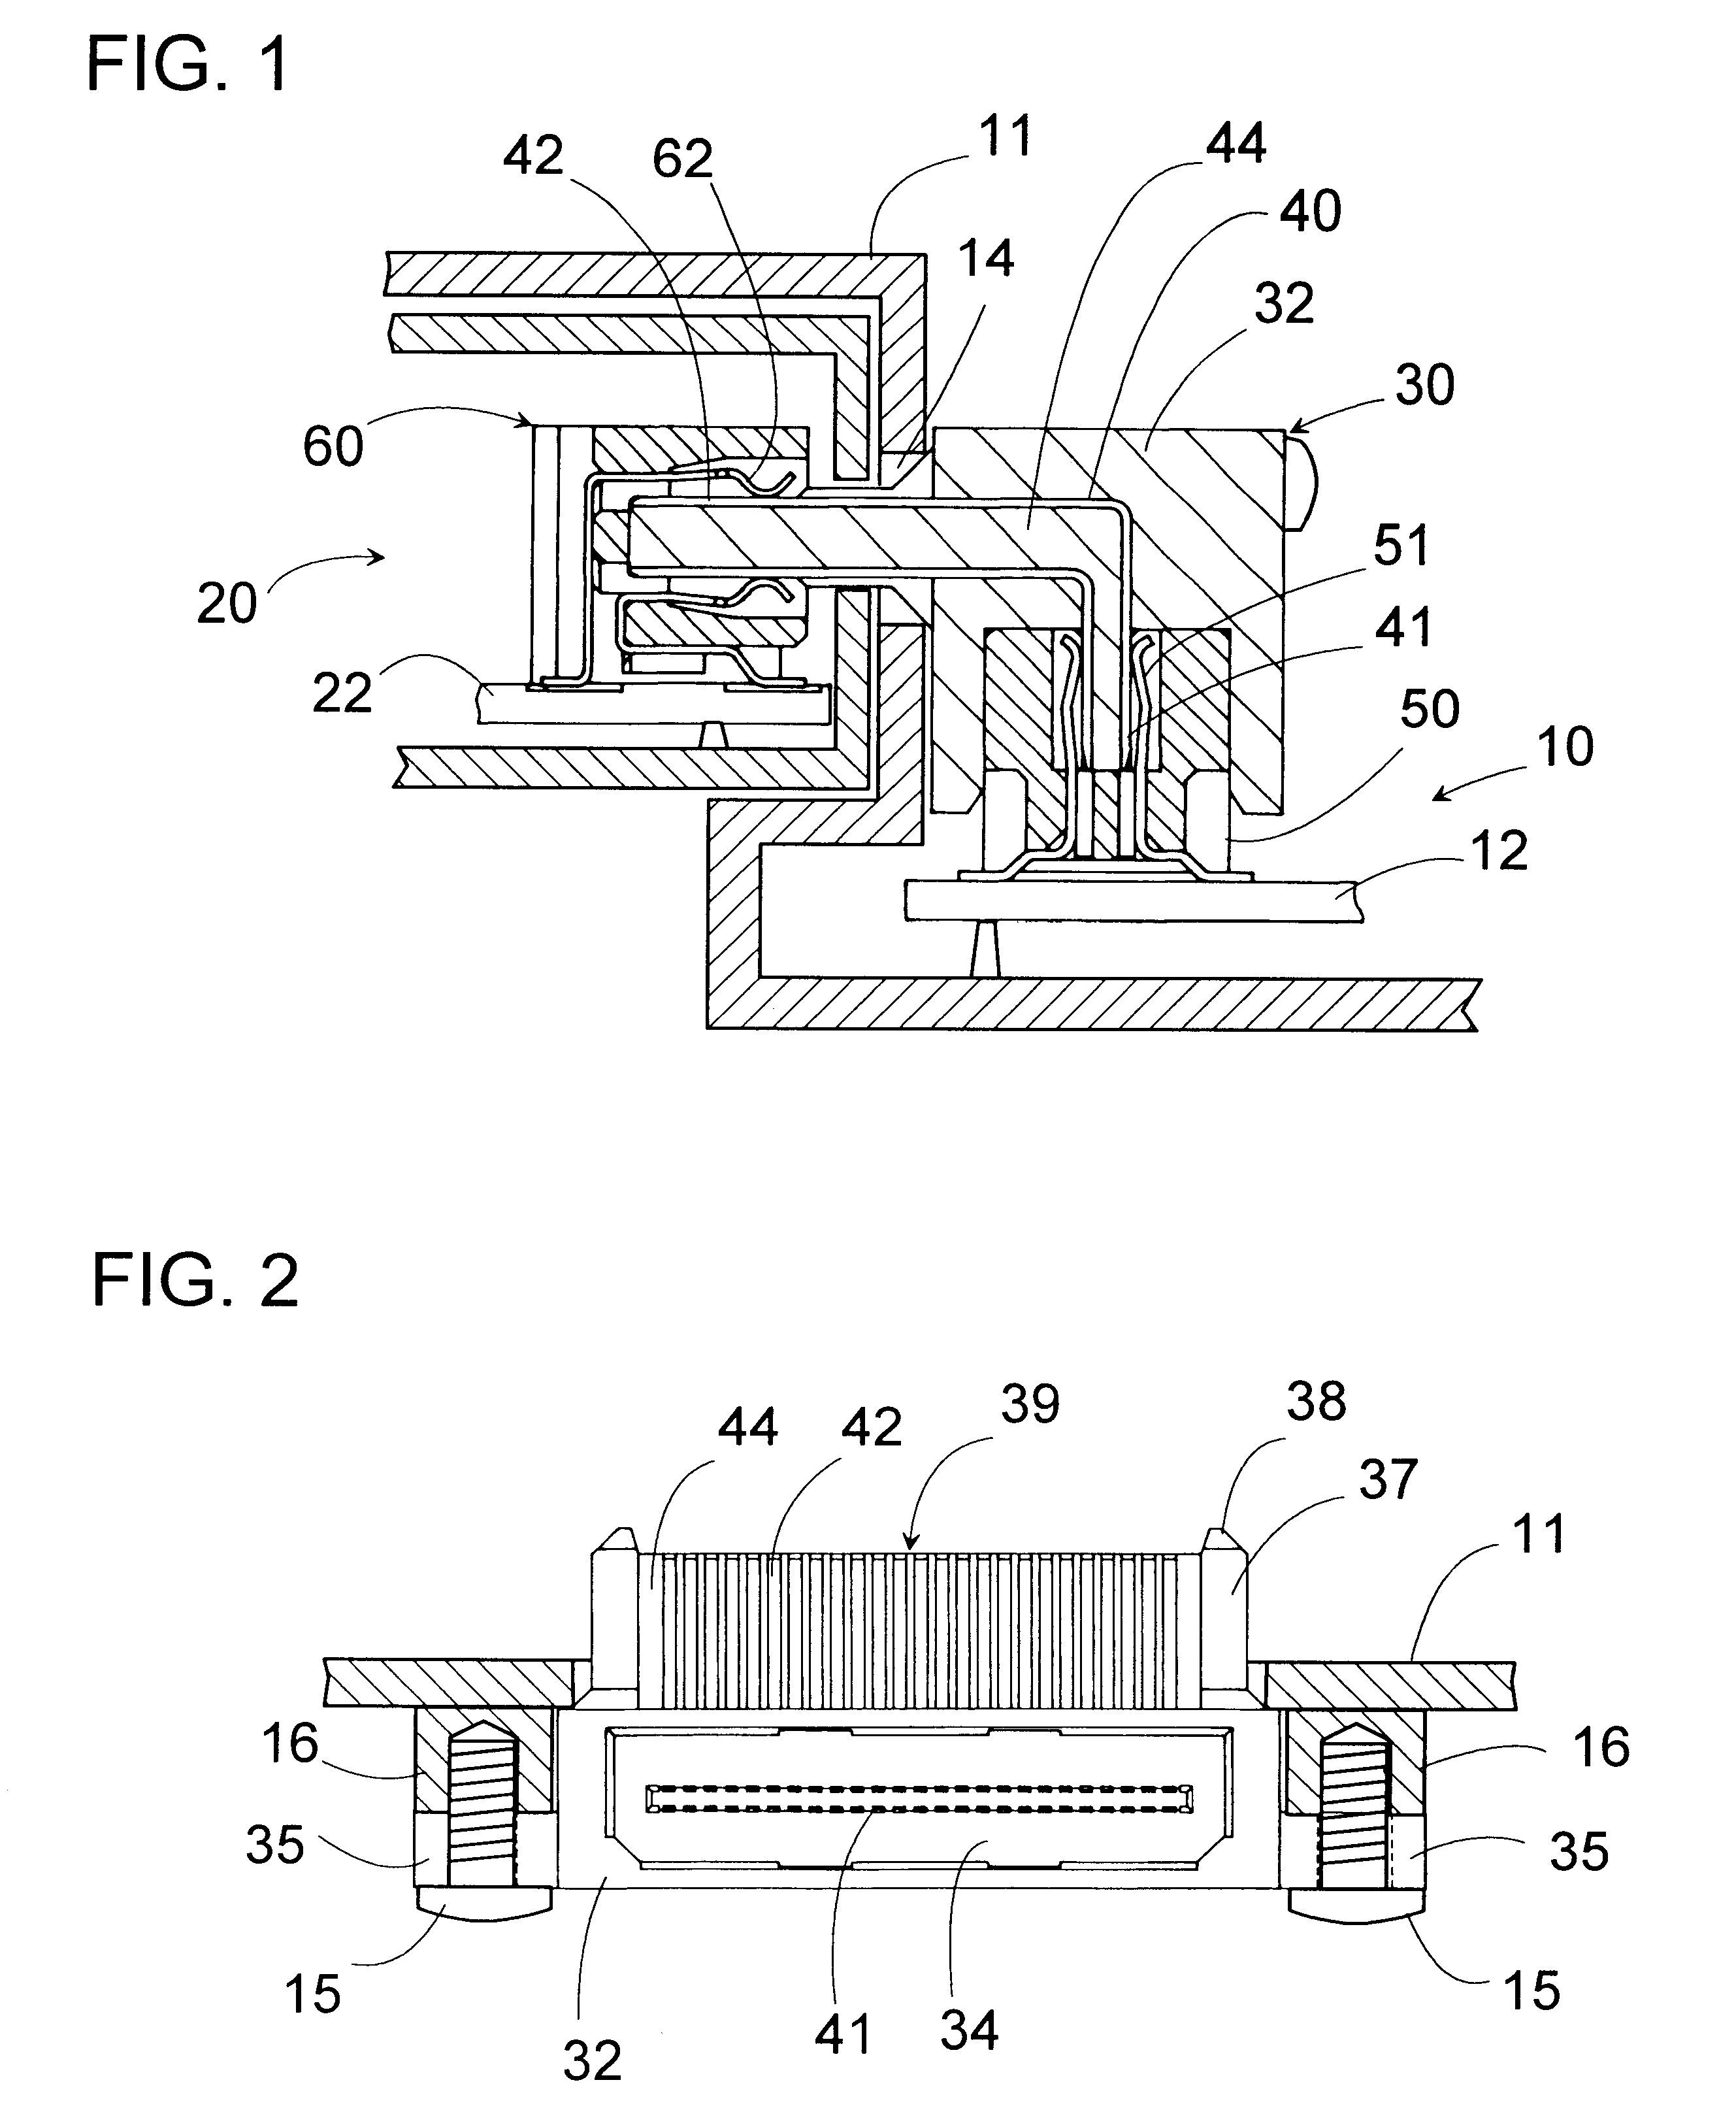 Electrical coupler for detachable interconnection between a main unit and an external unit